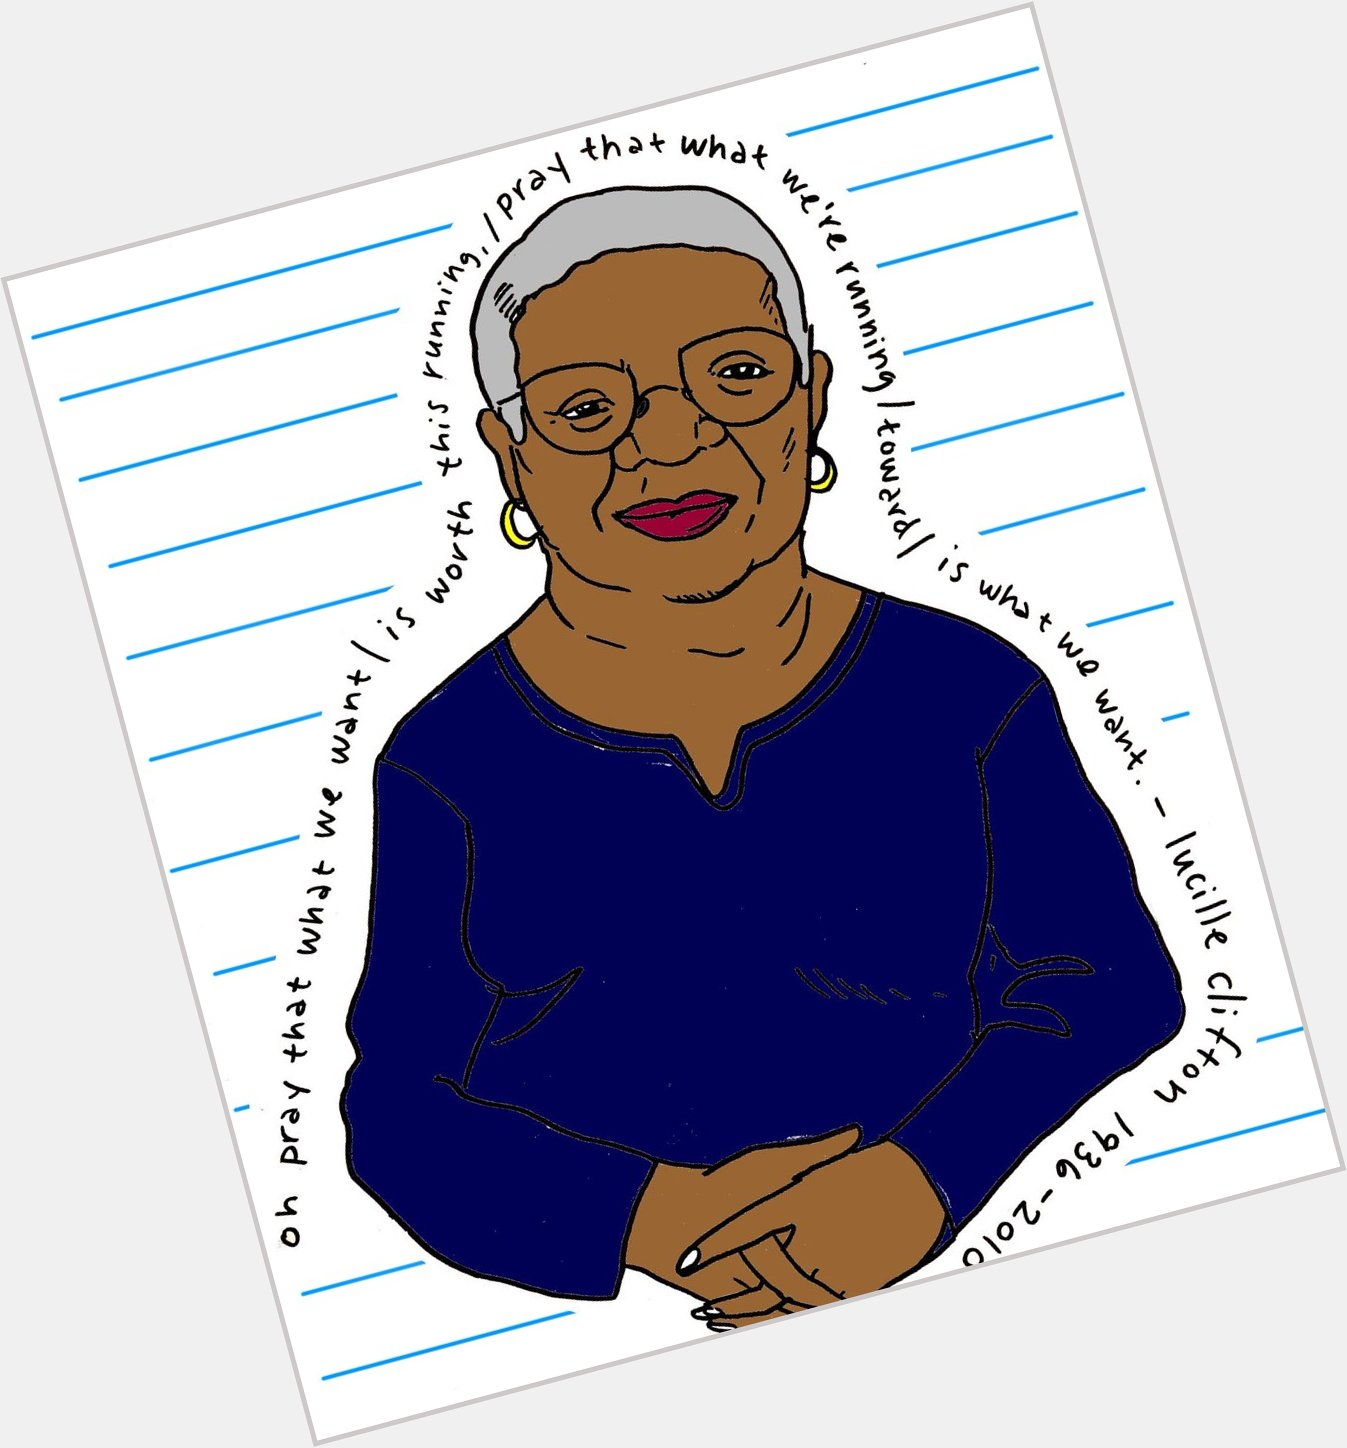 Happy Birthday to one of my favorite poets, Lucille Clifton! 